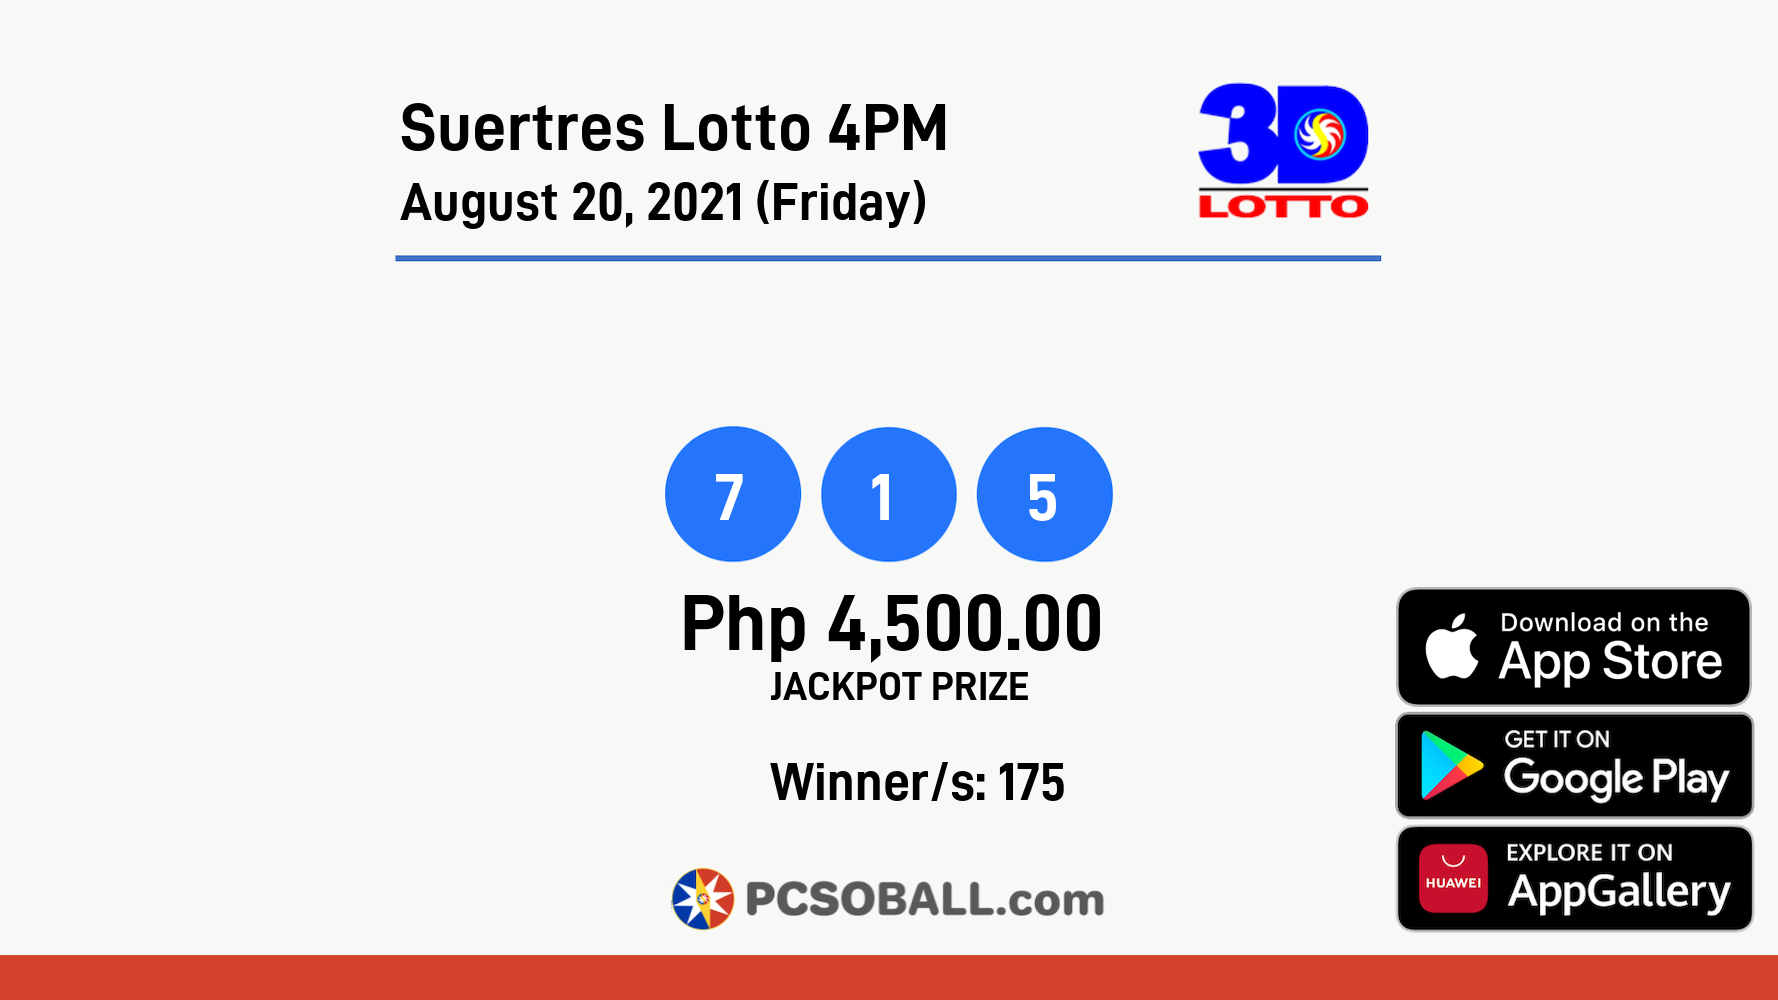 Suertres Lotto 4PM August 20, 2021 (Friday) Result